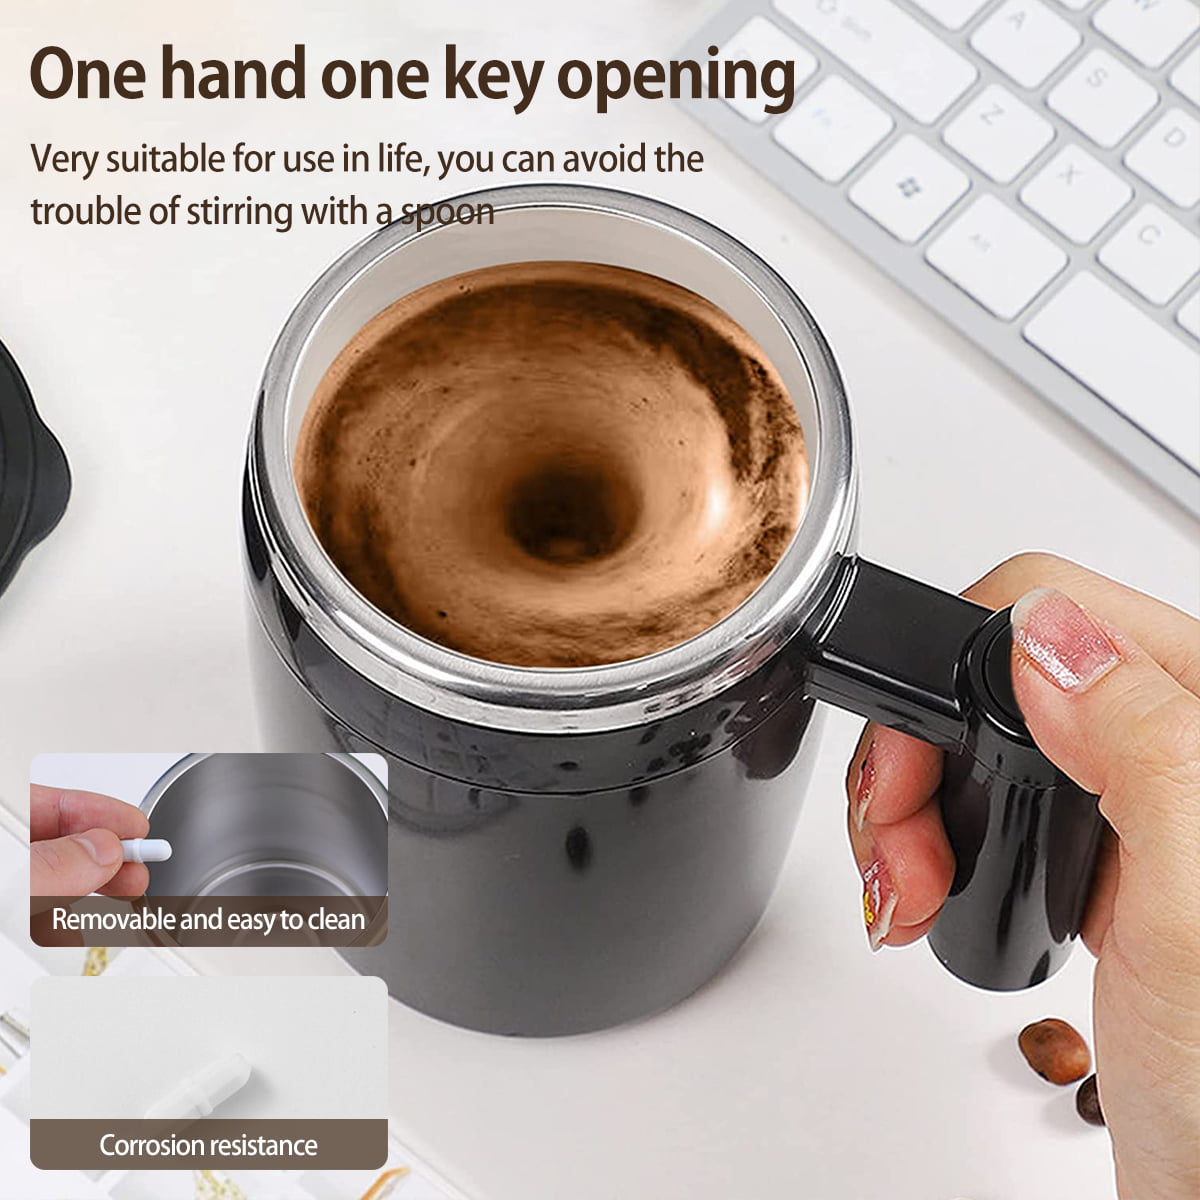  FCSWEET Self Stirring Mug,Rechargeable Auto Magnetic